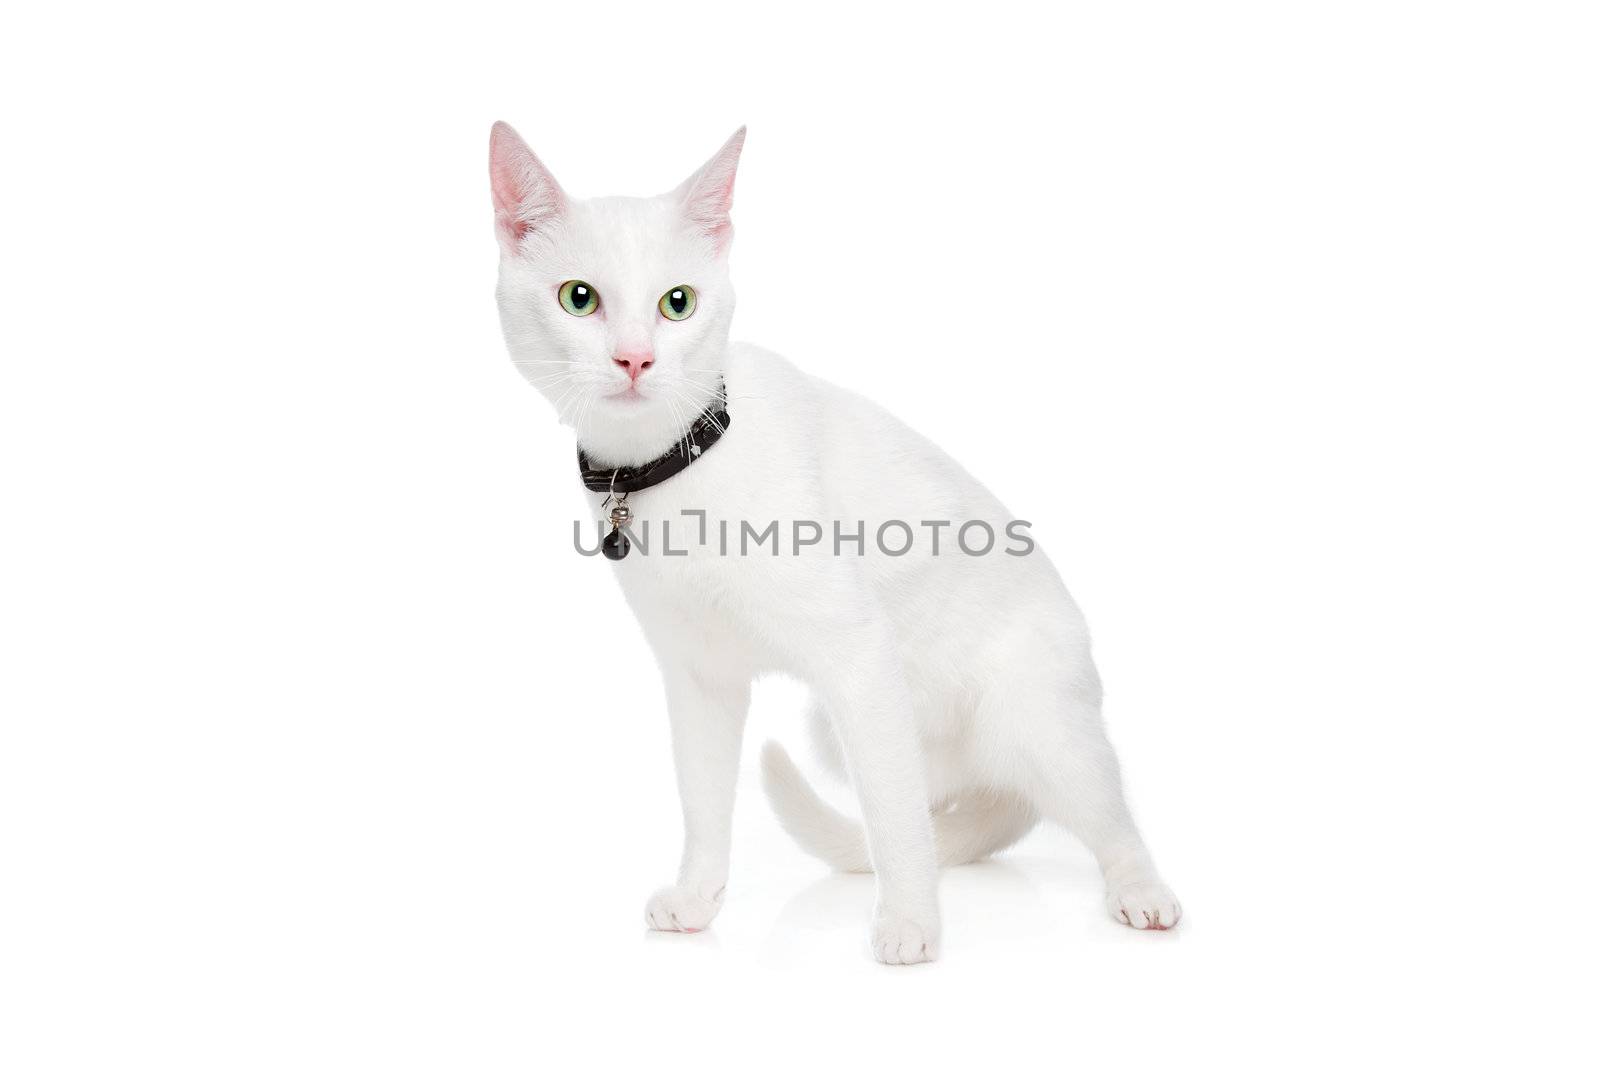 Ragdoll cat with green eyes on white background